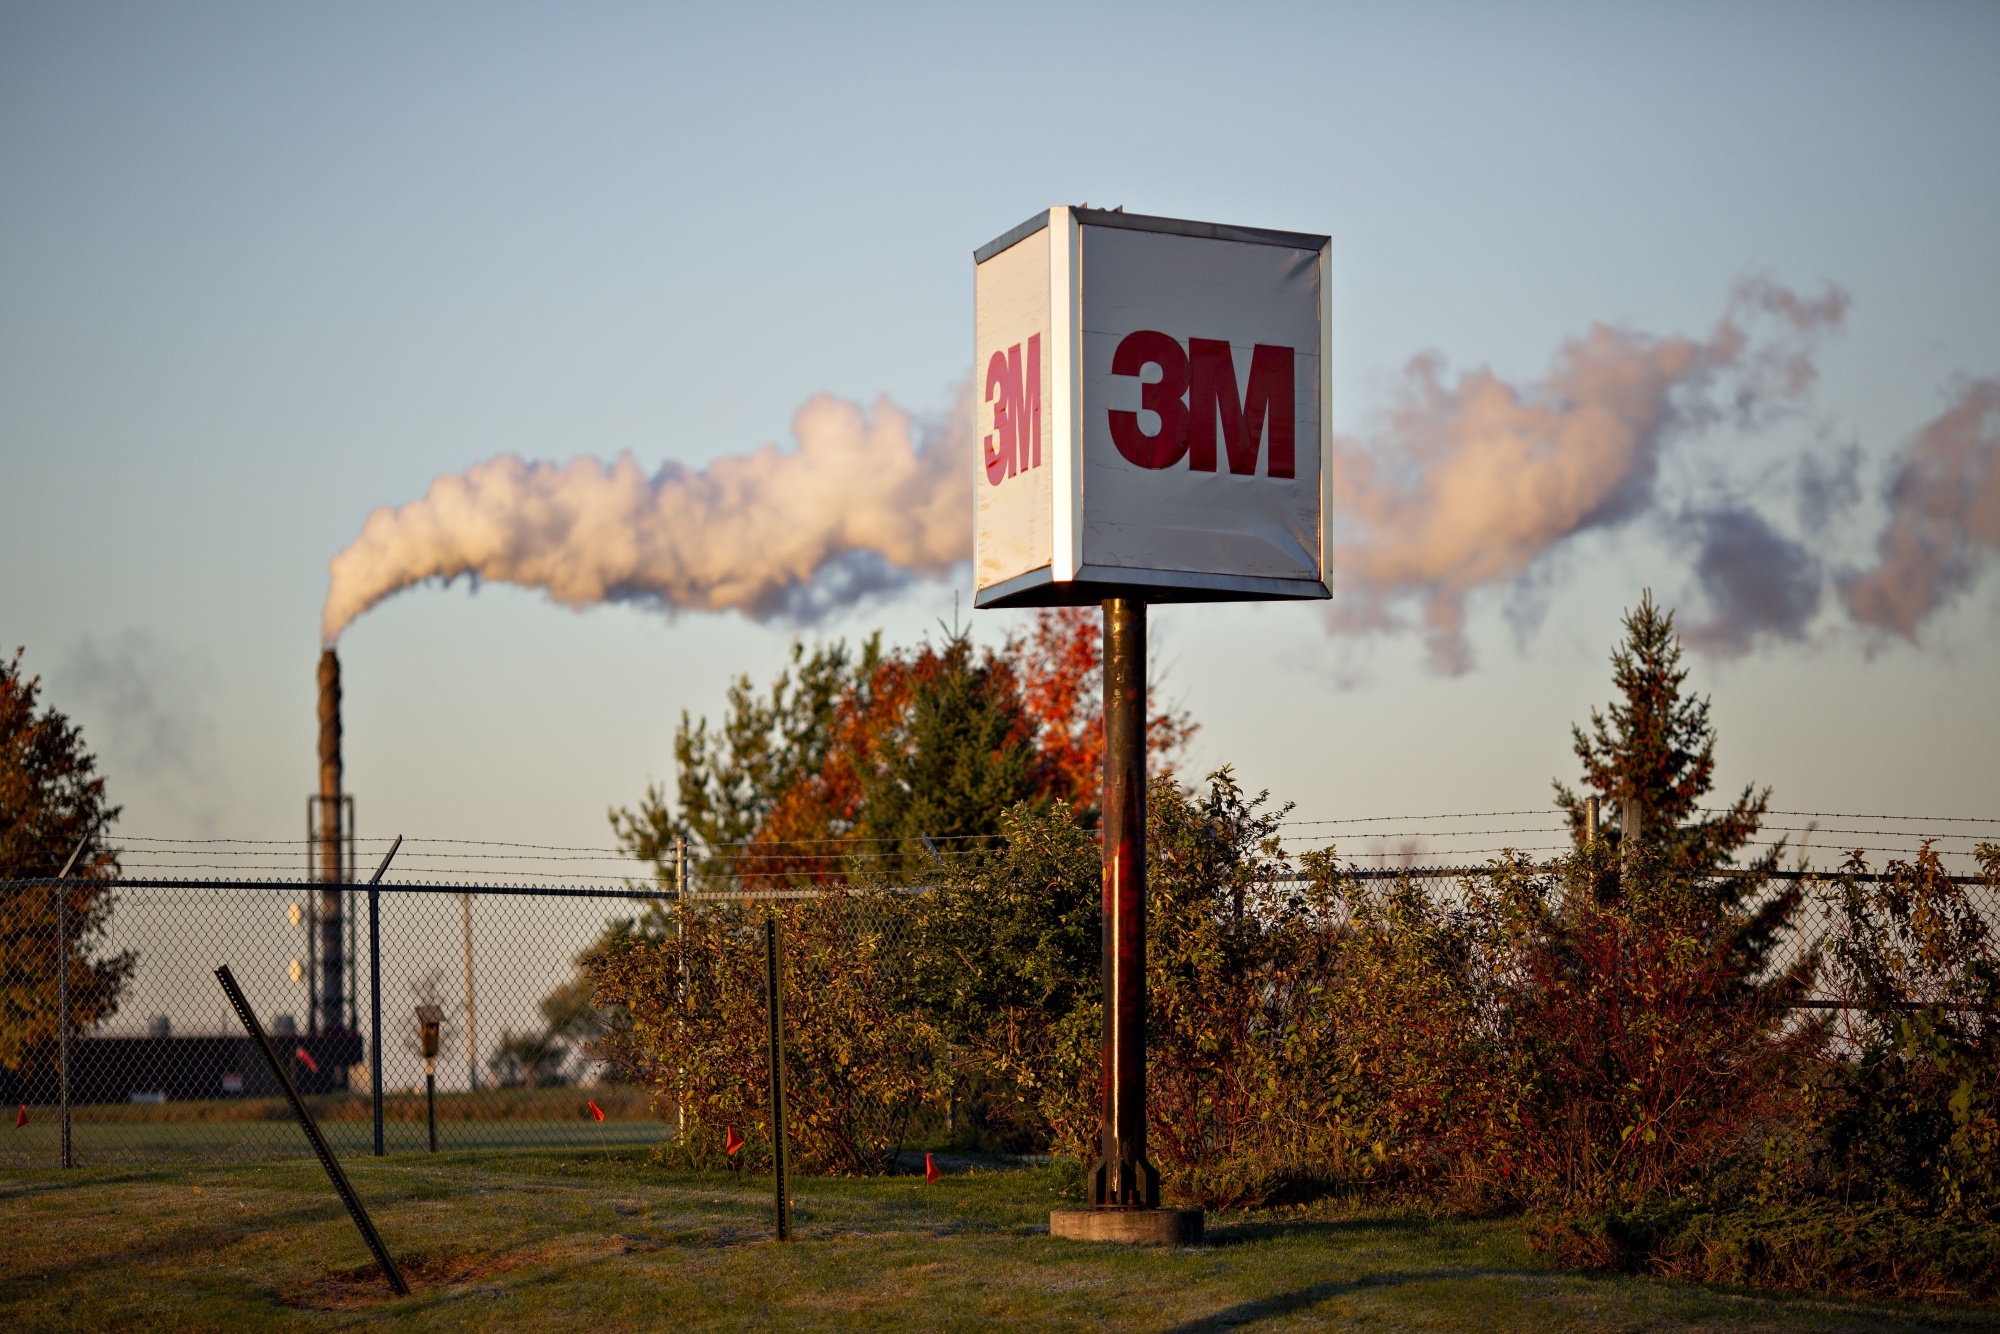 3M to Pay Up to $12.5 Billion to Settle PFAS Polluted Drinking Water Suits  (MMM) - Bloomberg